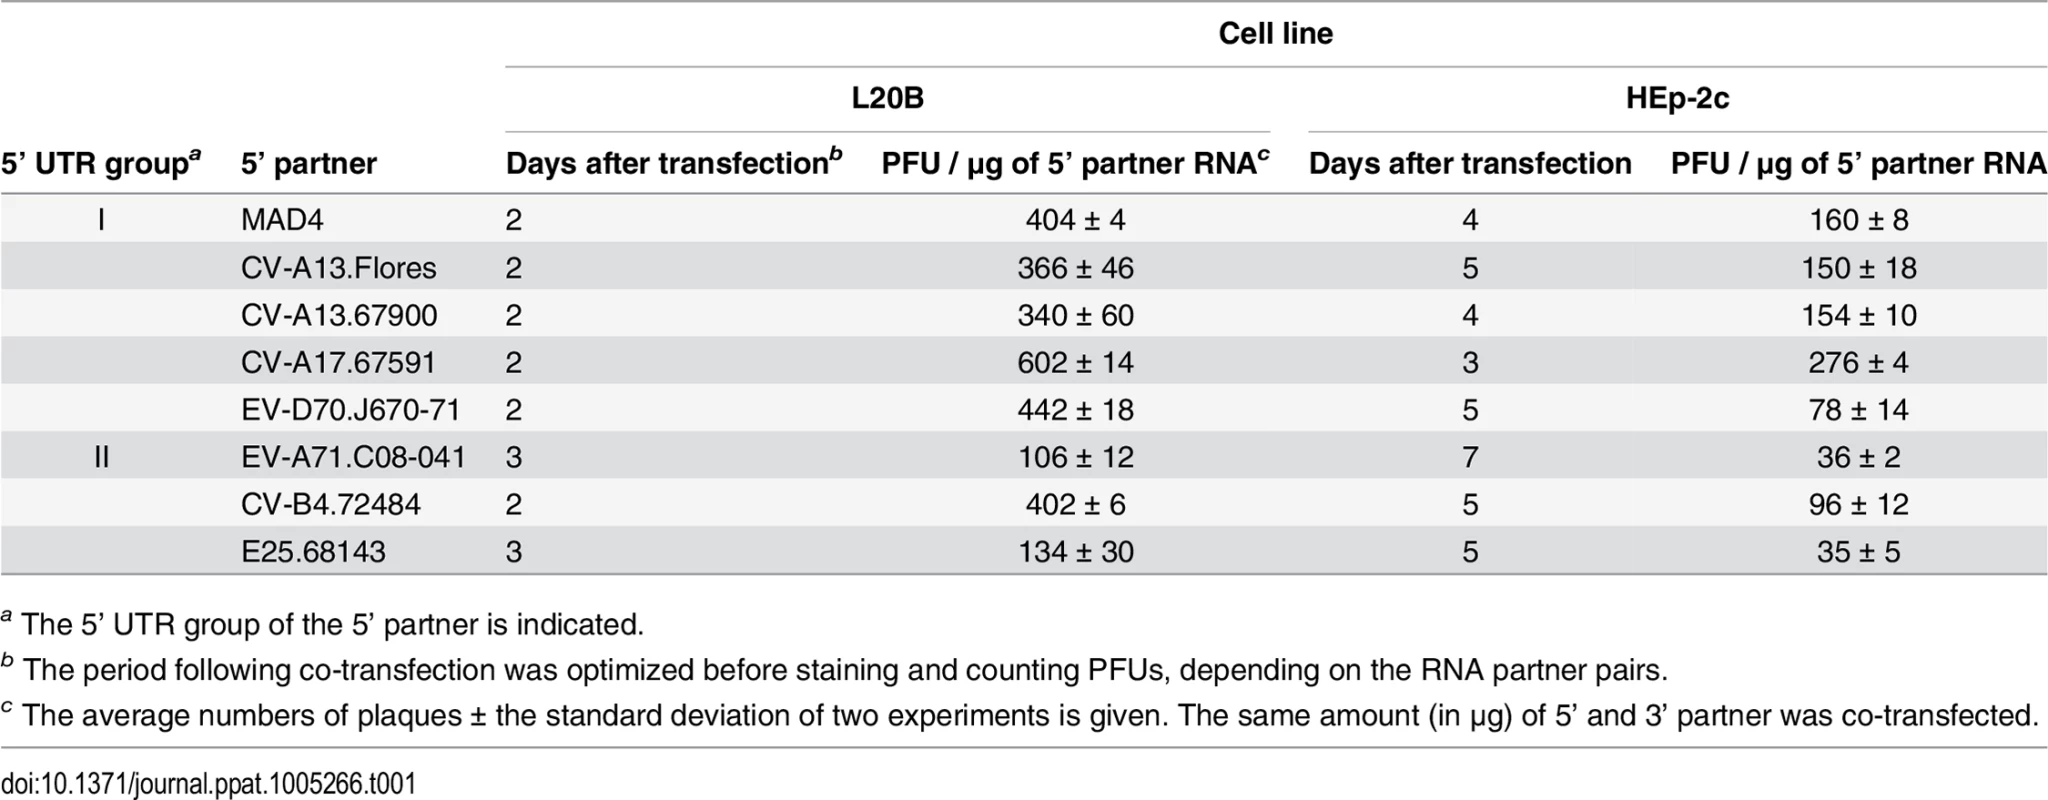 Recombination efficiency following the co-transfection of L20B and HEp-2c cells with the MAD4 3’ RNA partner and each 5’ RNA partner.